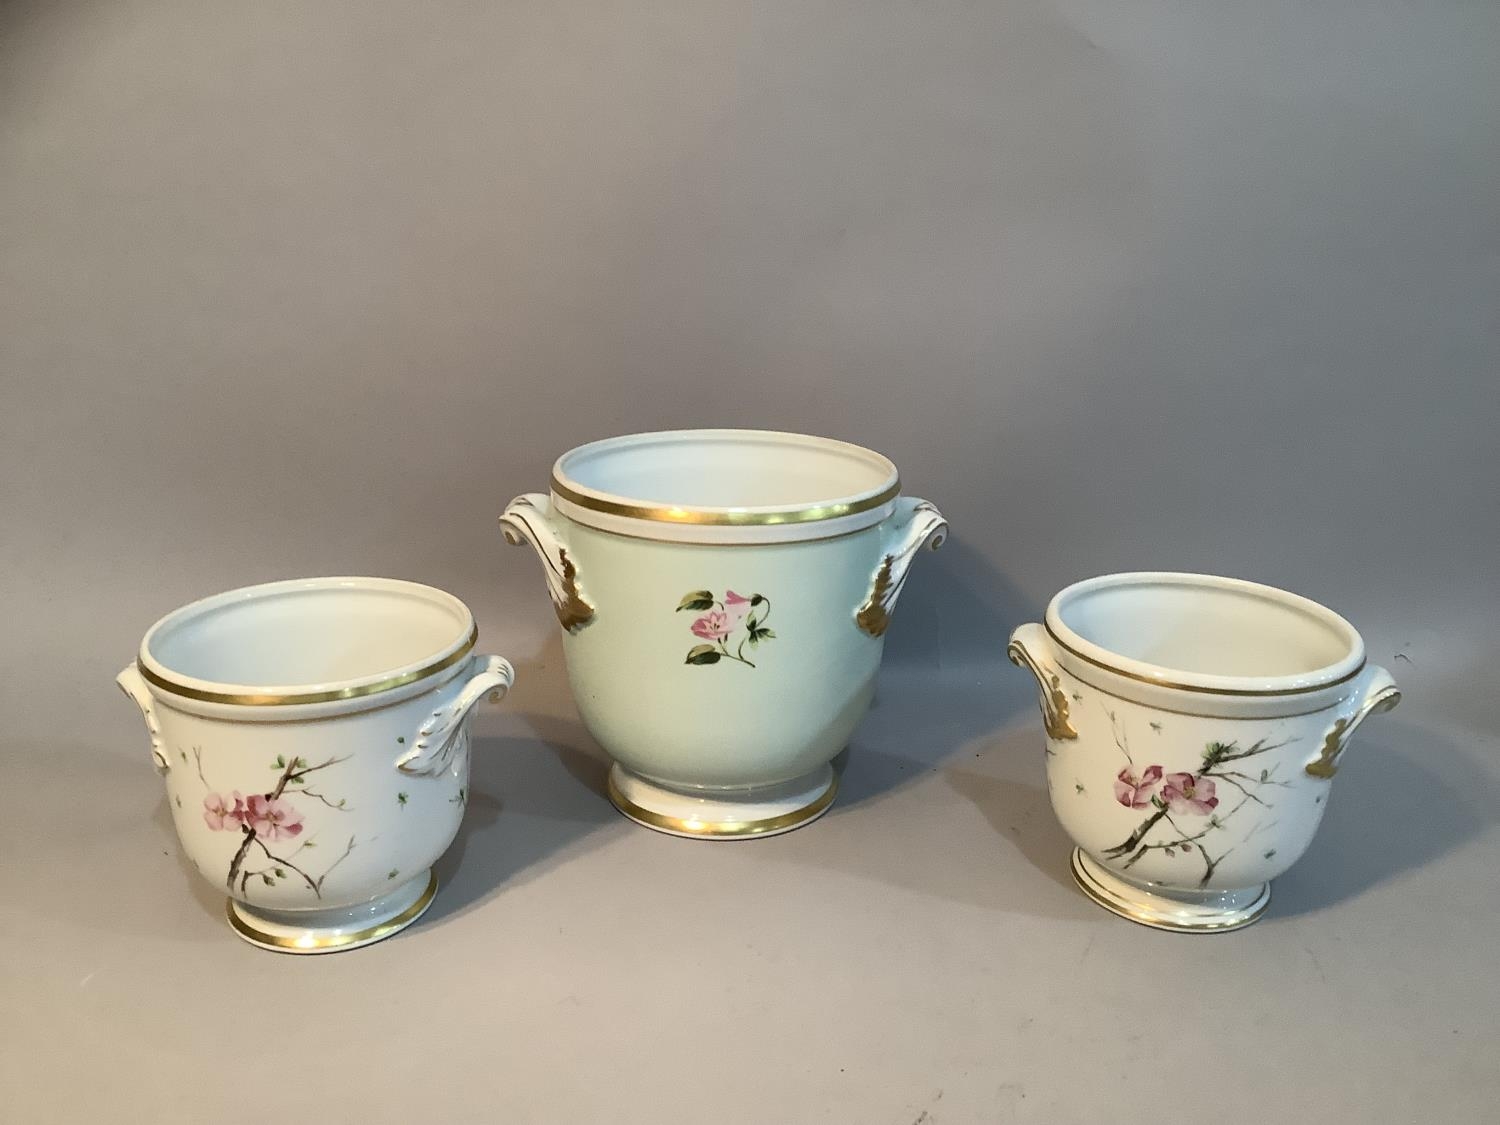 A pair of Vista Allegra cache pots with painted floral decoration and another larger example - Image 2 of 3